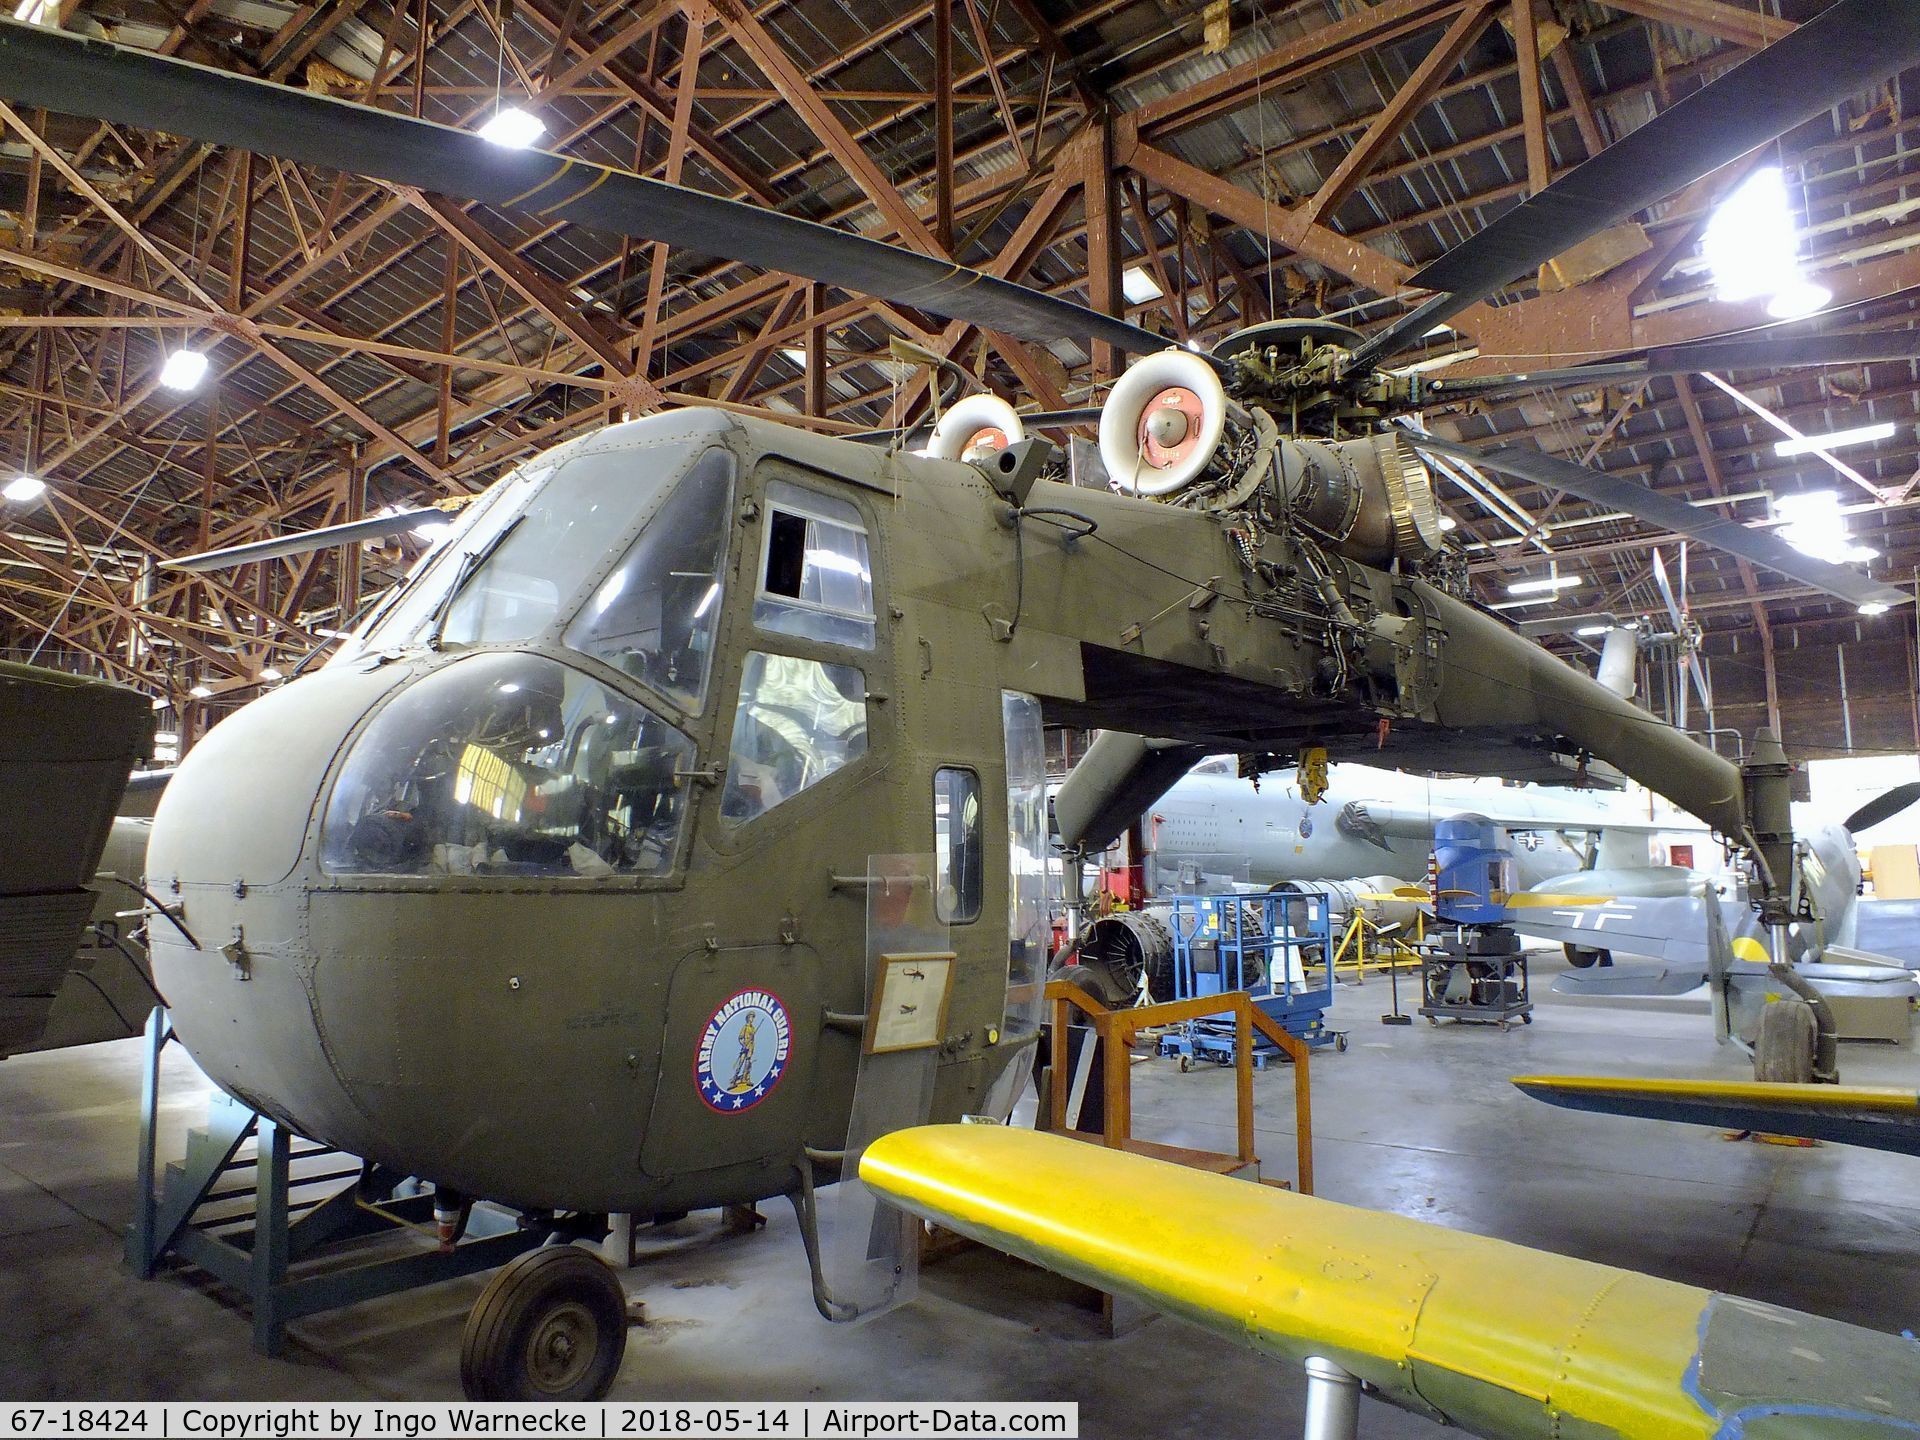 67-18424, 1968 Sikorsky CH-54A Tarhe C/N 64.026, Sikorsky CH-54A Tarhe at the Combat Air Museum, Topeka KS